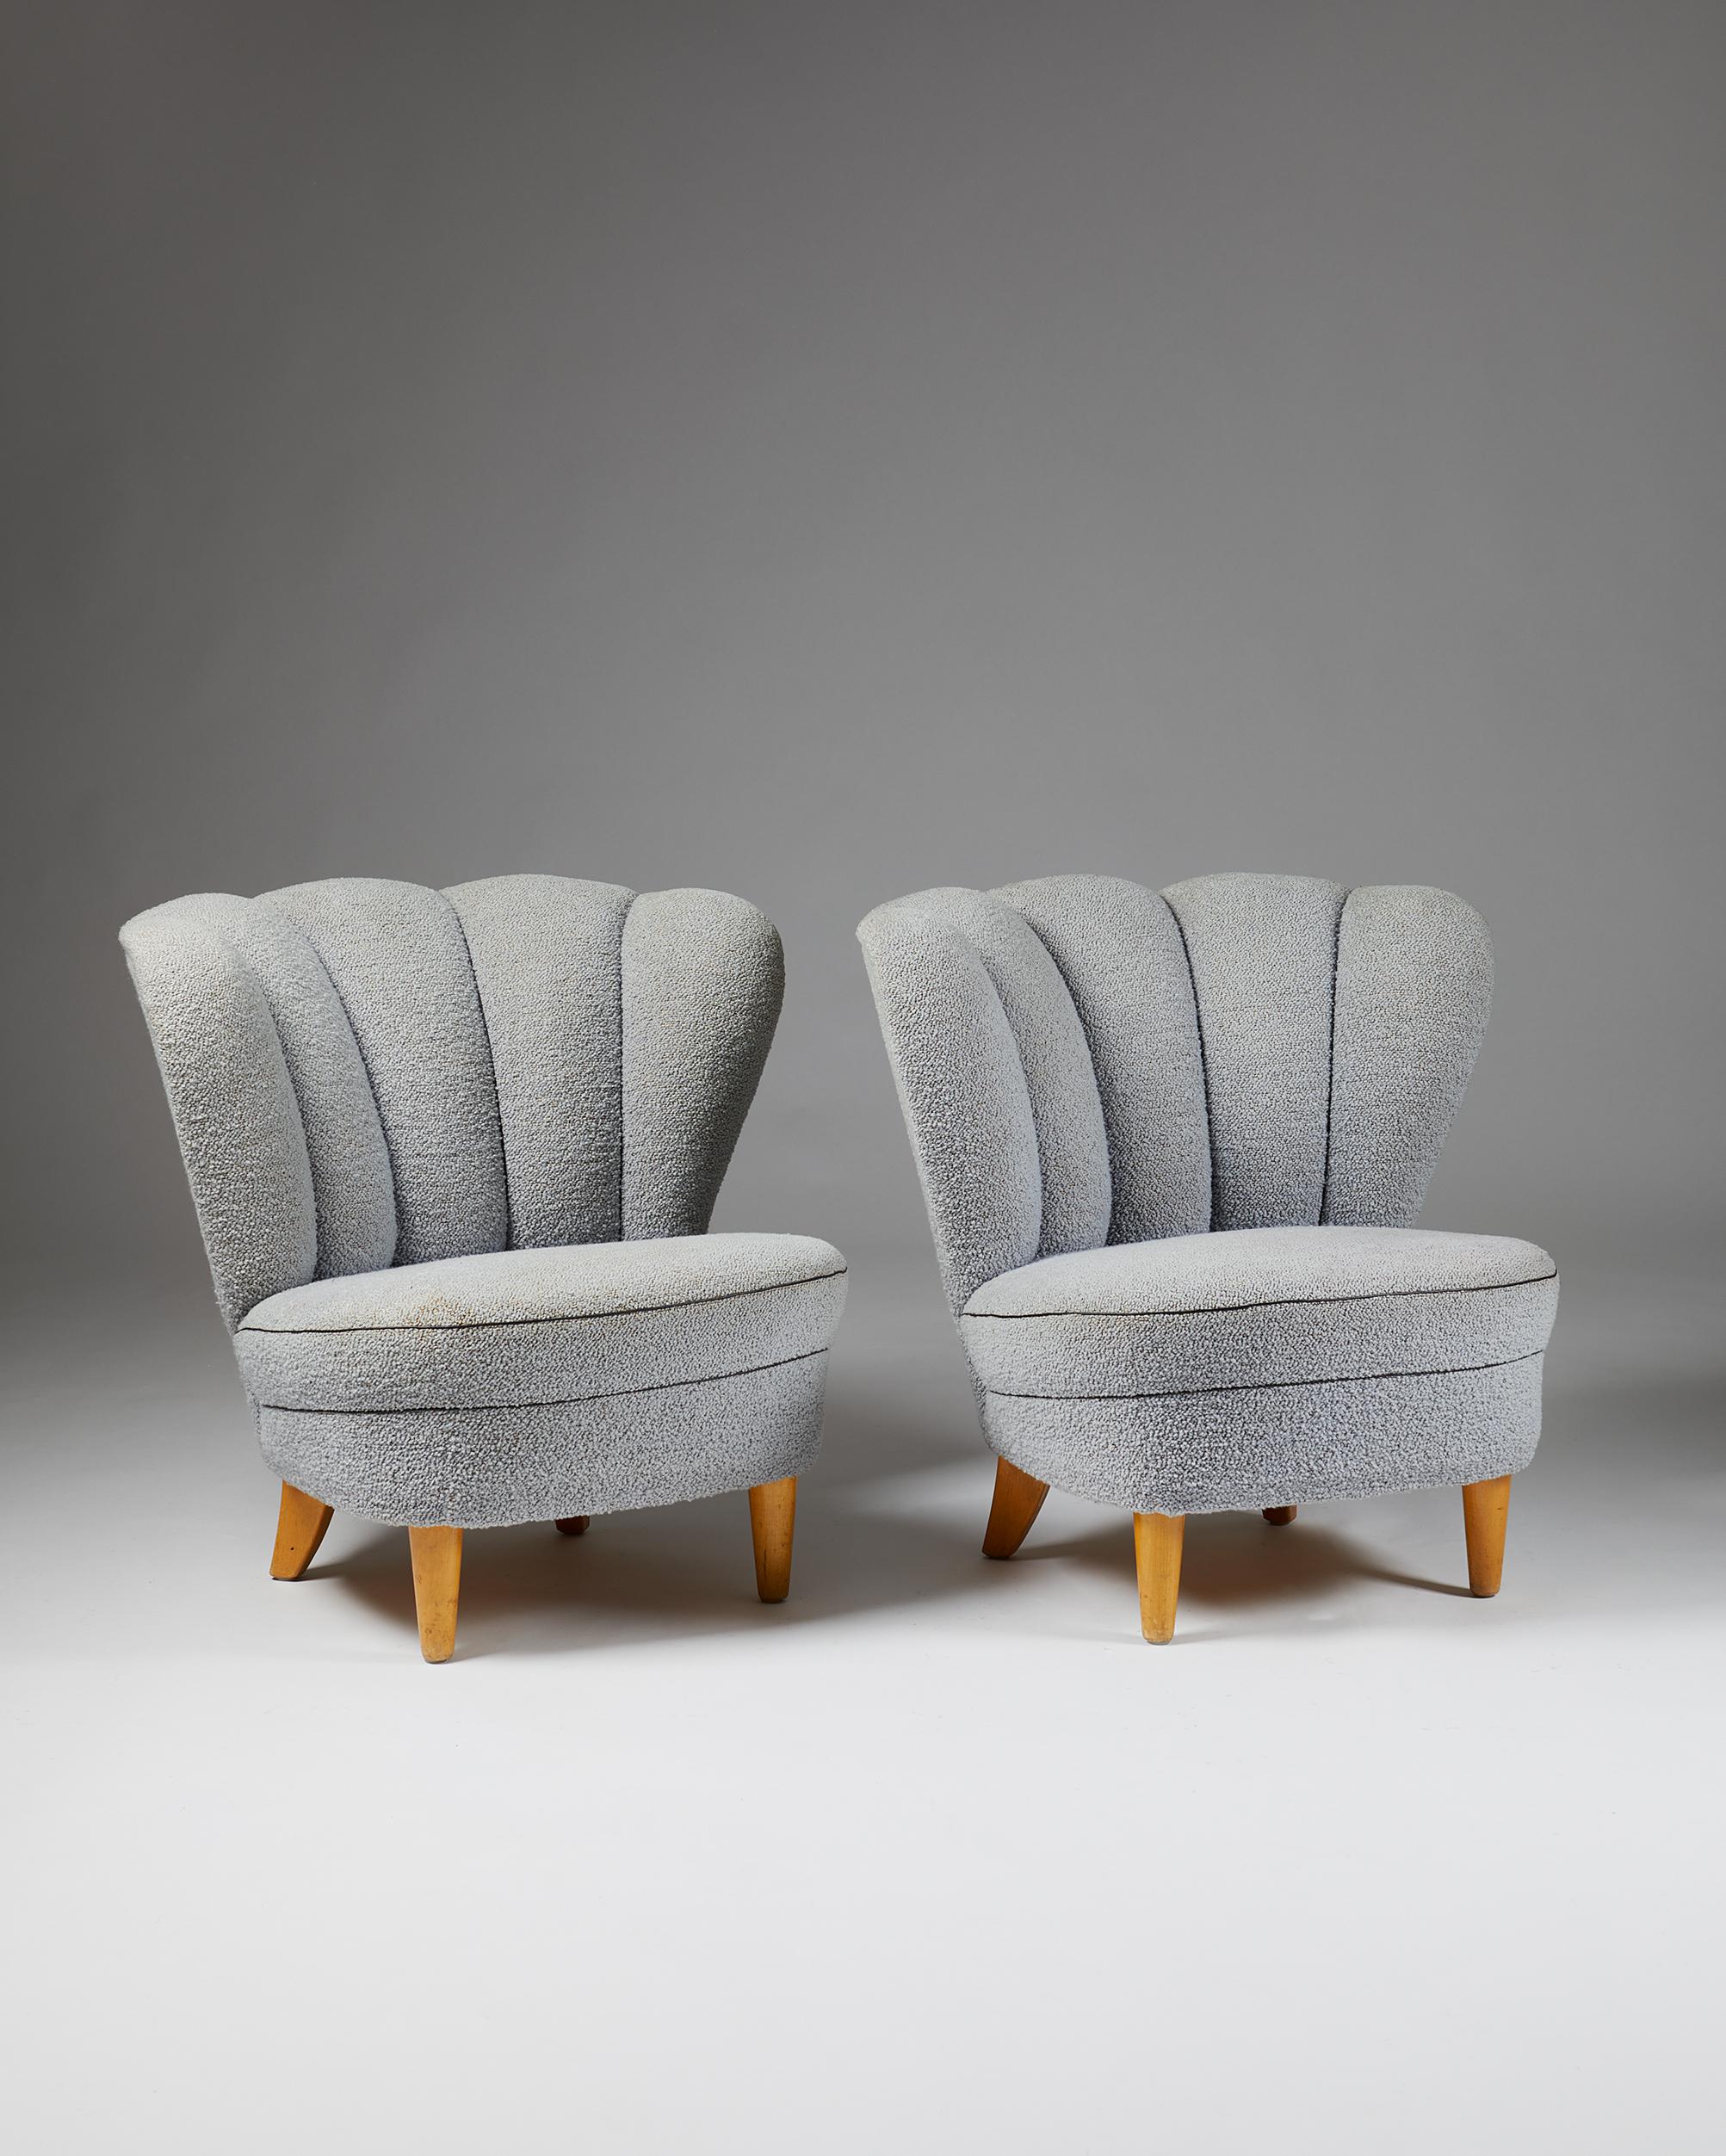 Pair of easy chairs, anonymous,
Finland. 1950's.

Birch and upholstery.

Measurements: 
H: 68 cm/ 2' 2 3/4